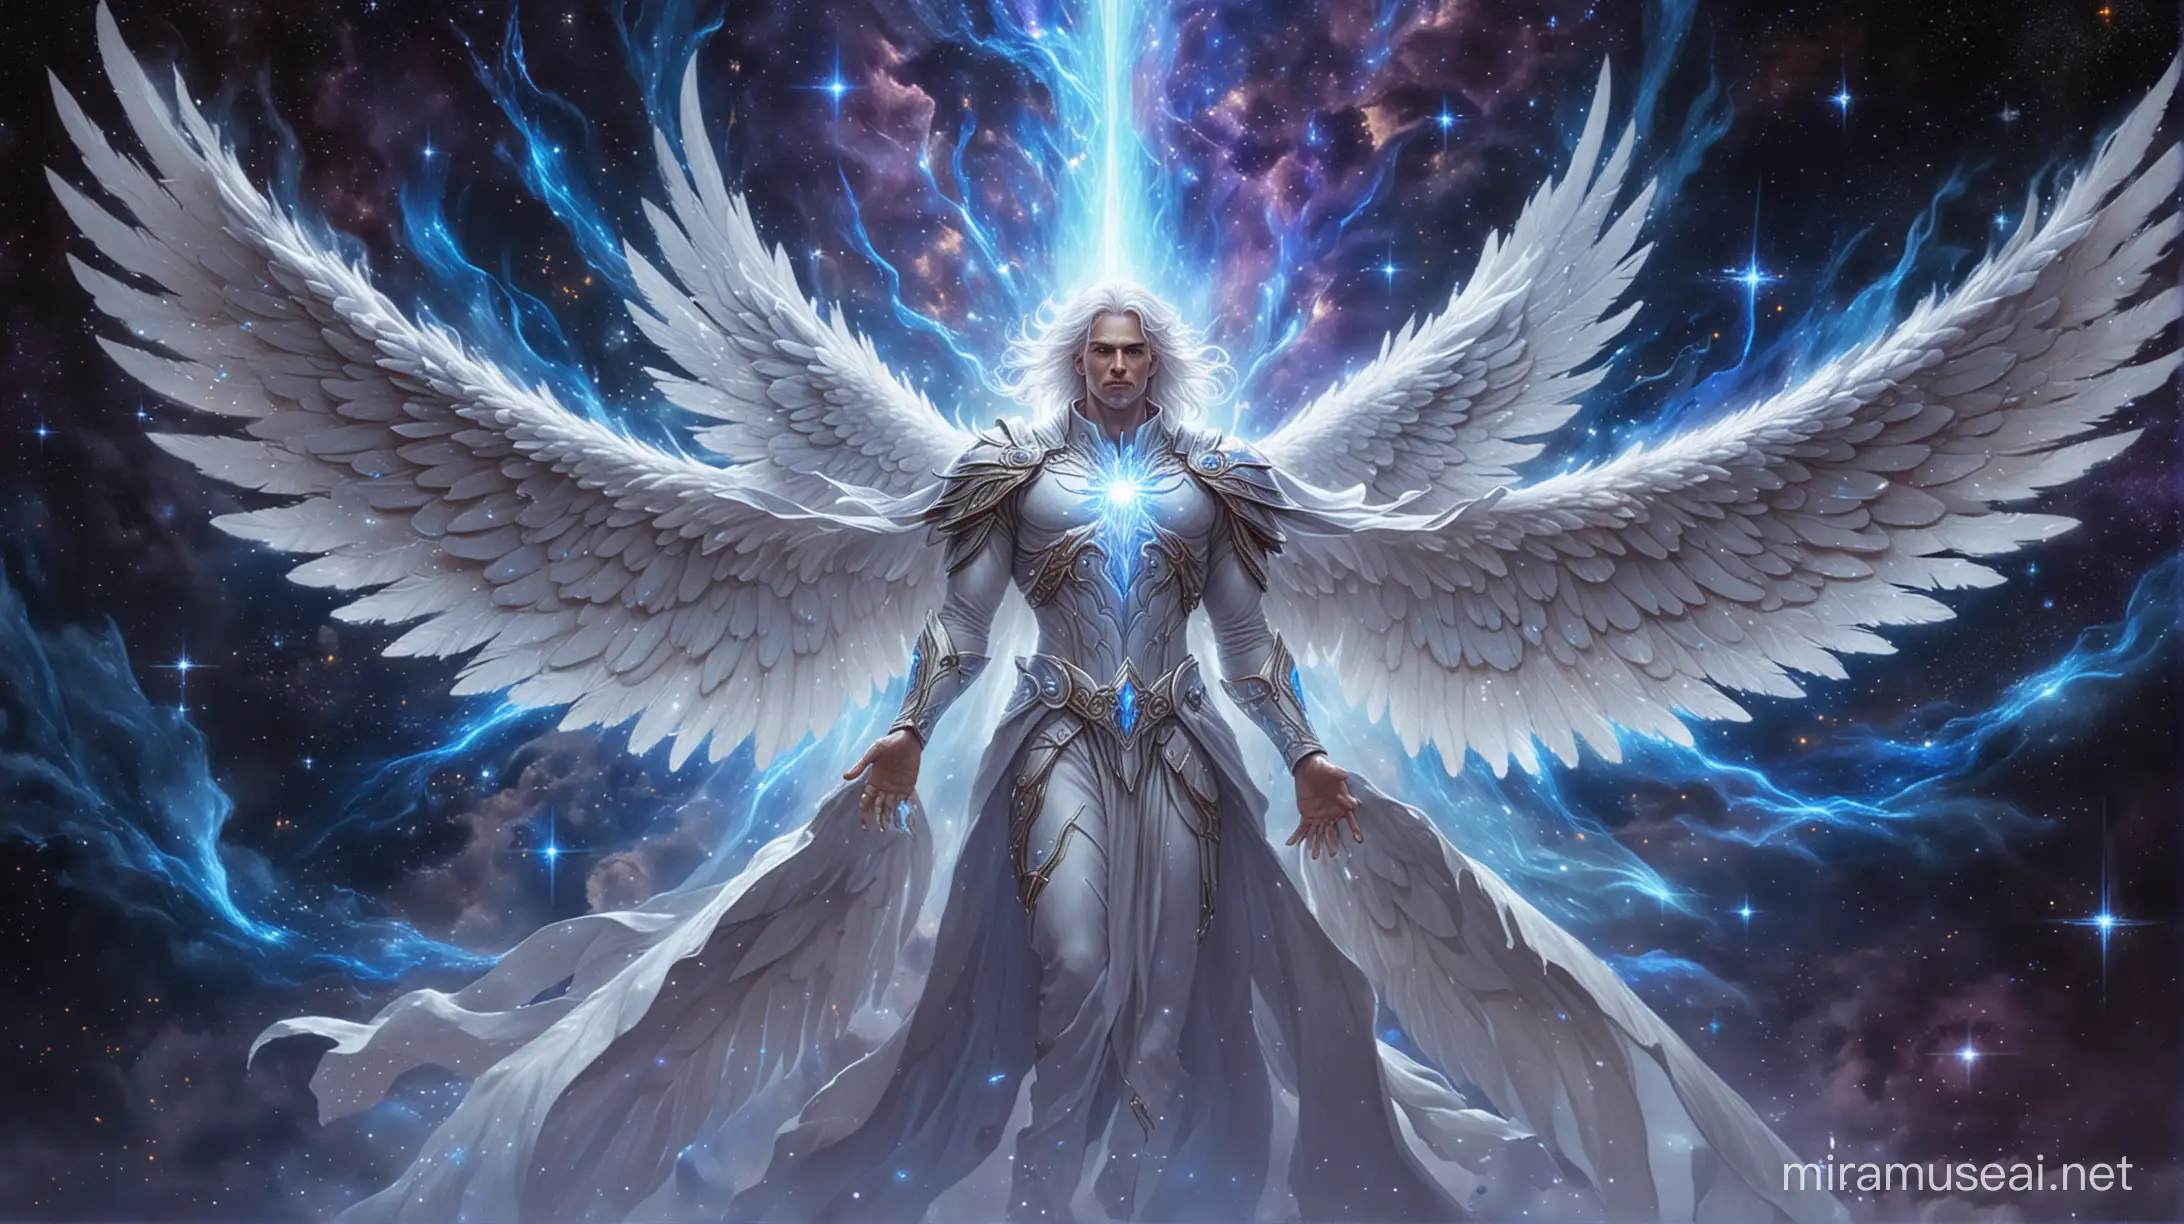 Powerful Guardian Angel with Burning Blue Wings Amidst Celestial Beauty